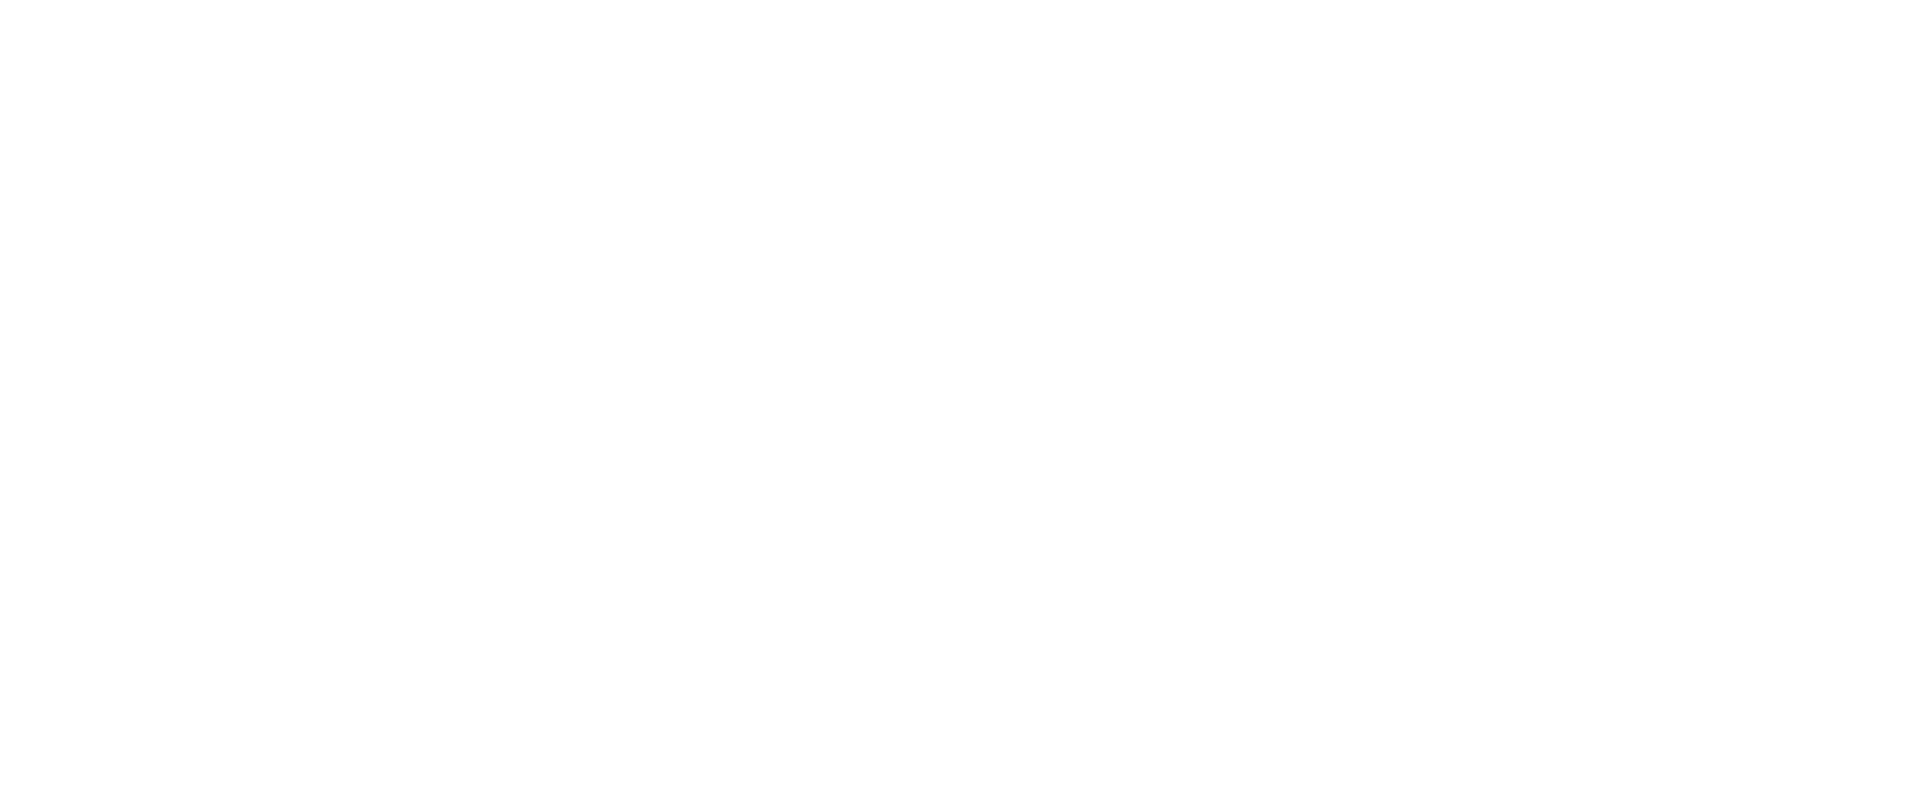 Gluten Free Bakery in Port Perry | Marcelle's Kitchen